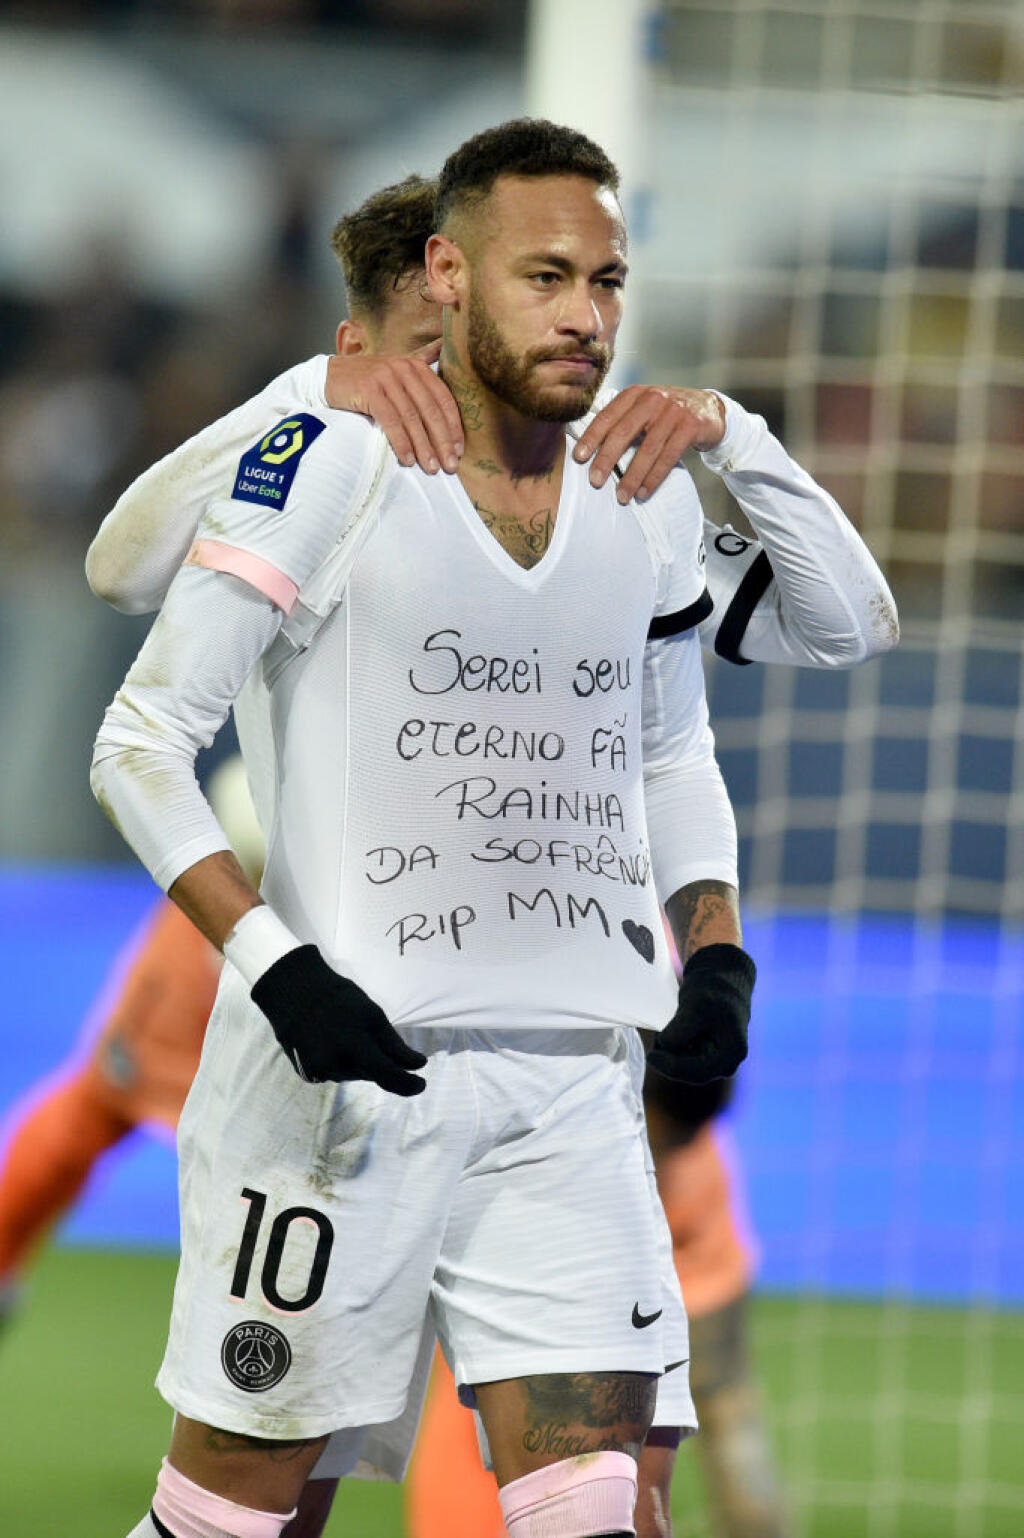 BORDEAUX, FRANCE - NOVEMBER 6 : Neymar Jr pays tribute to Marília Mendonça during the Ligue 1 Uber Eats match between Girondins de Bordeaux and Paris Saint Germain at Stade Matmut Atlantique on November 6, 2021 in Bordeaux, France. Marília Mendonça, a Brazilian singer and friend of Neymar Jr died on a plane crash the same day, she was 26. (Photo by Lionel Hahn/Getty Images)